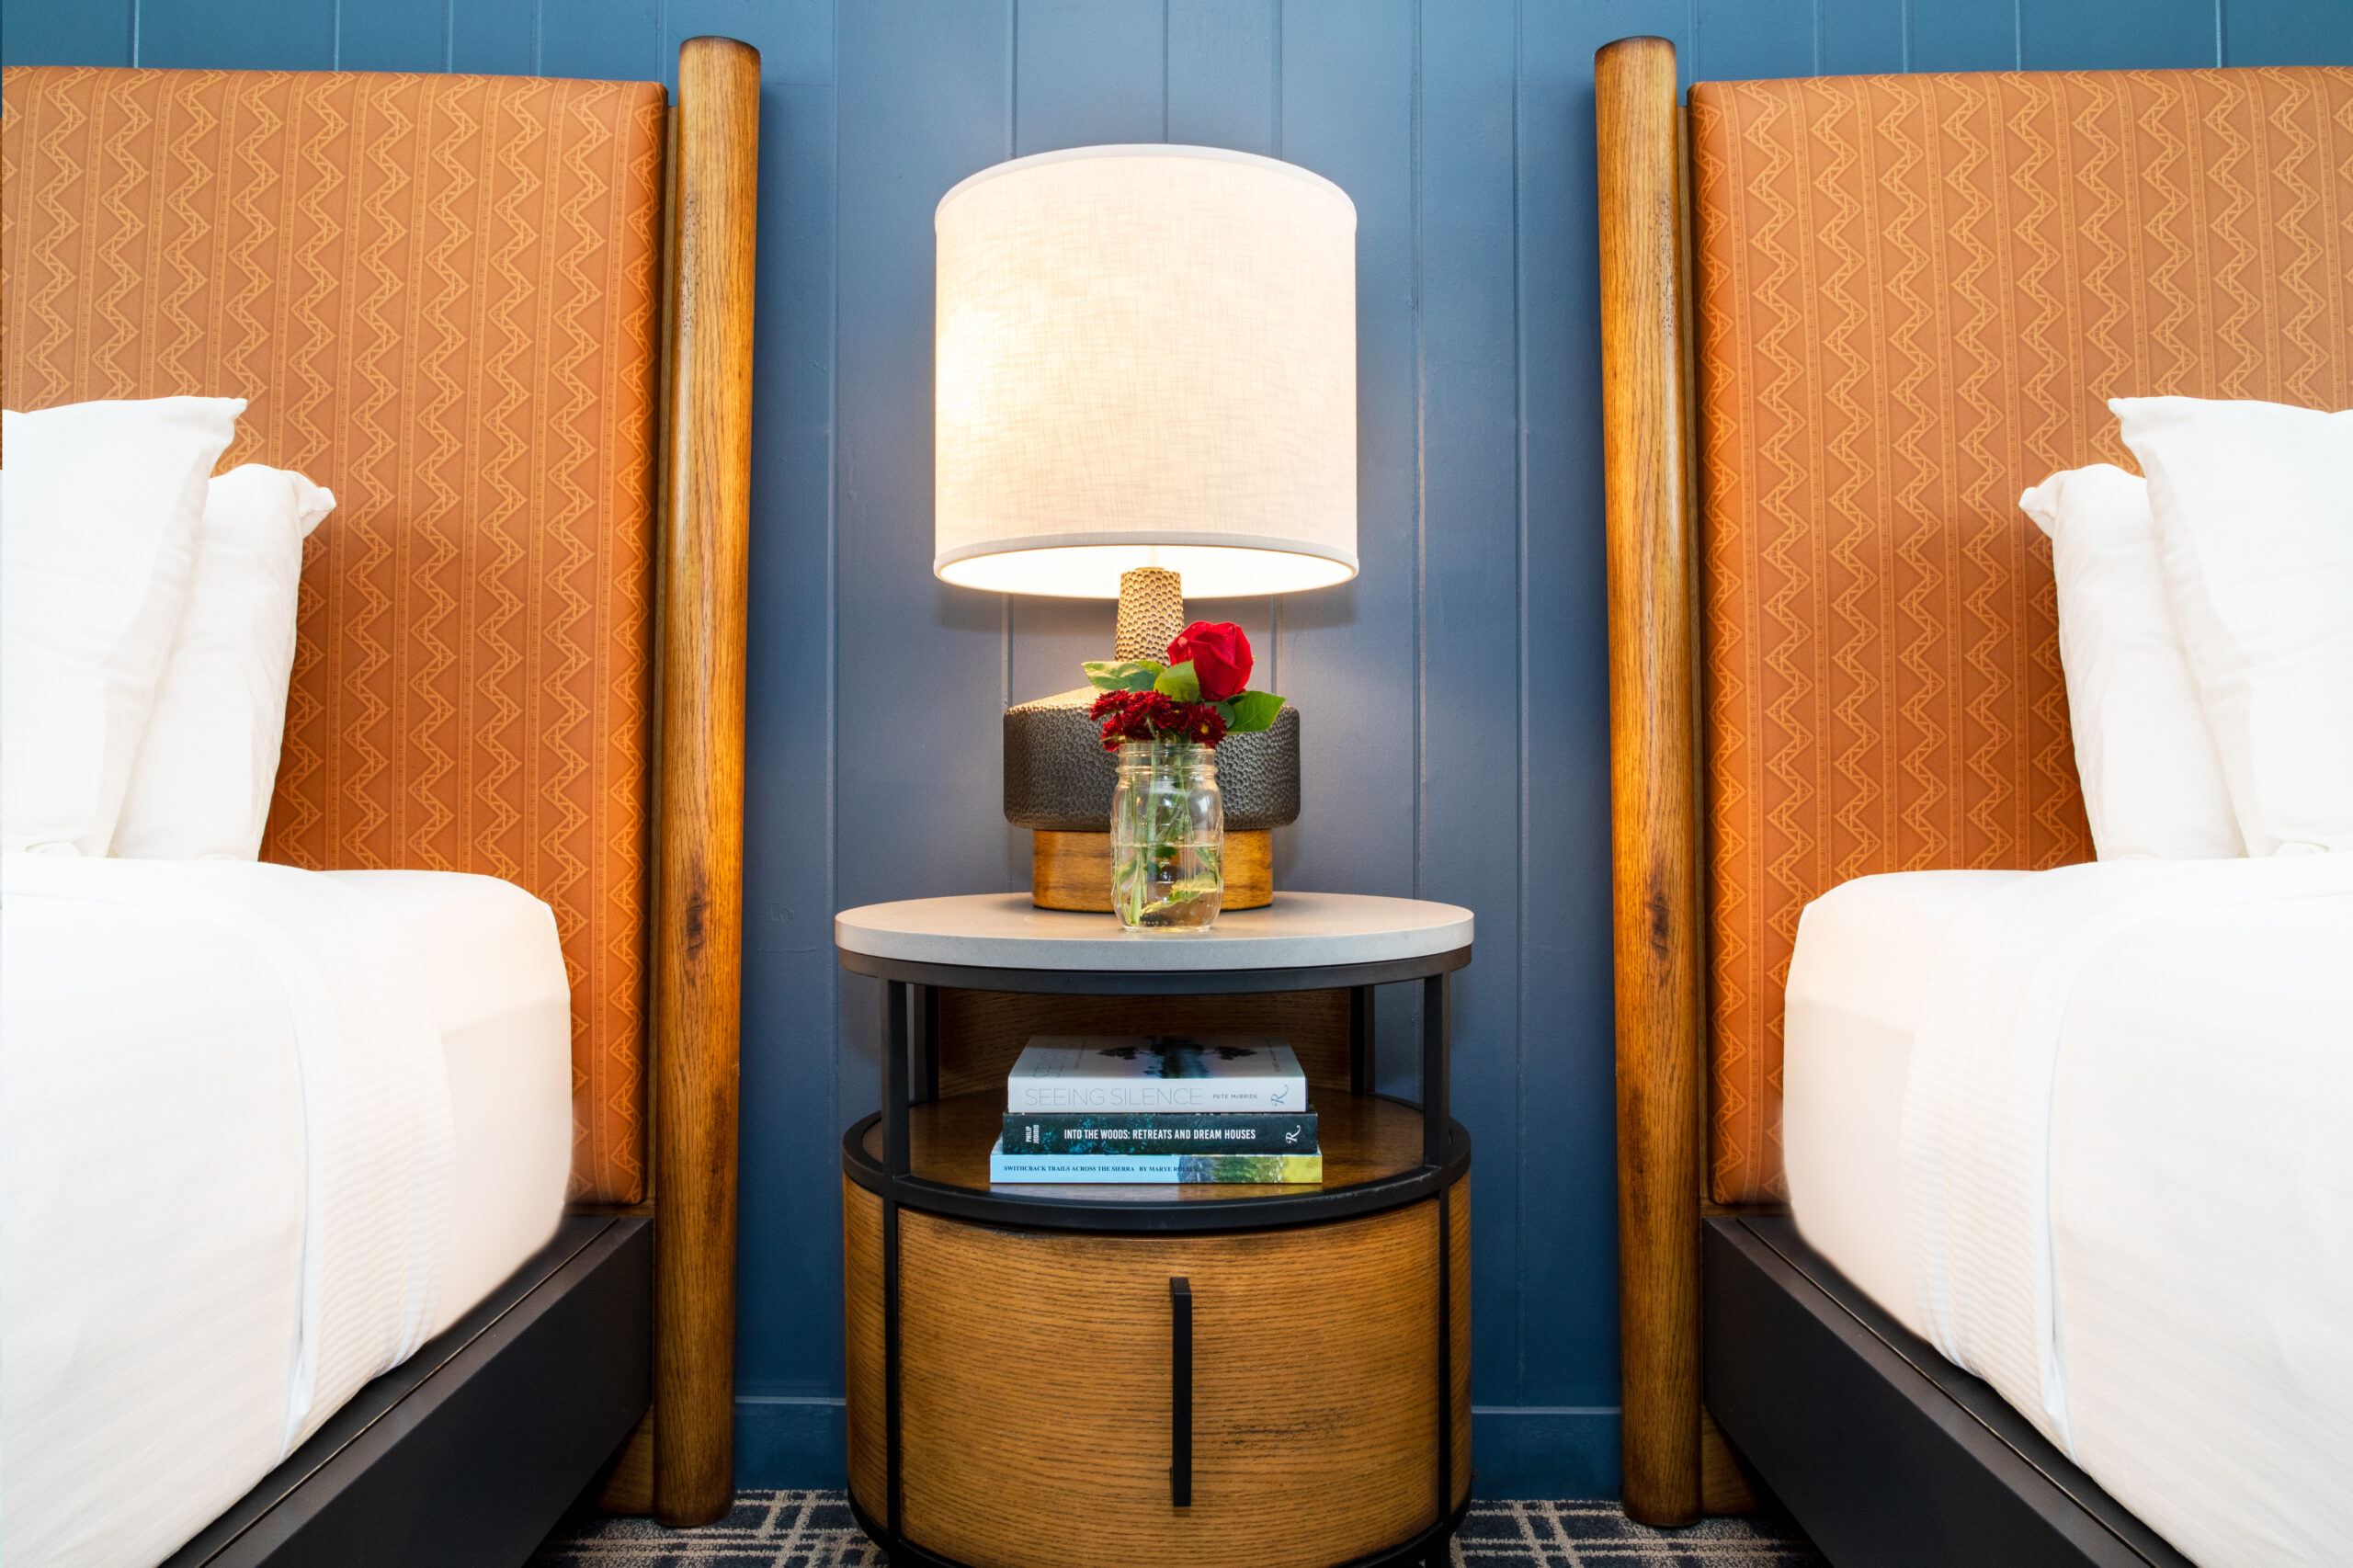 Adjacent to cozy beds, a side table accommodates a lamp, flower vase, and notebooks.